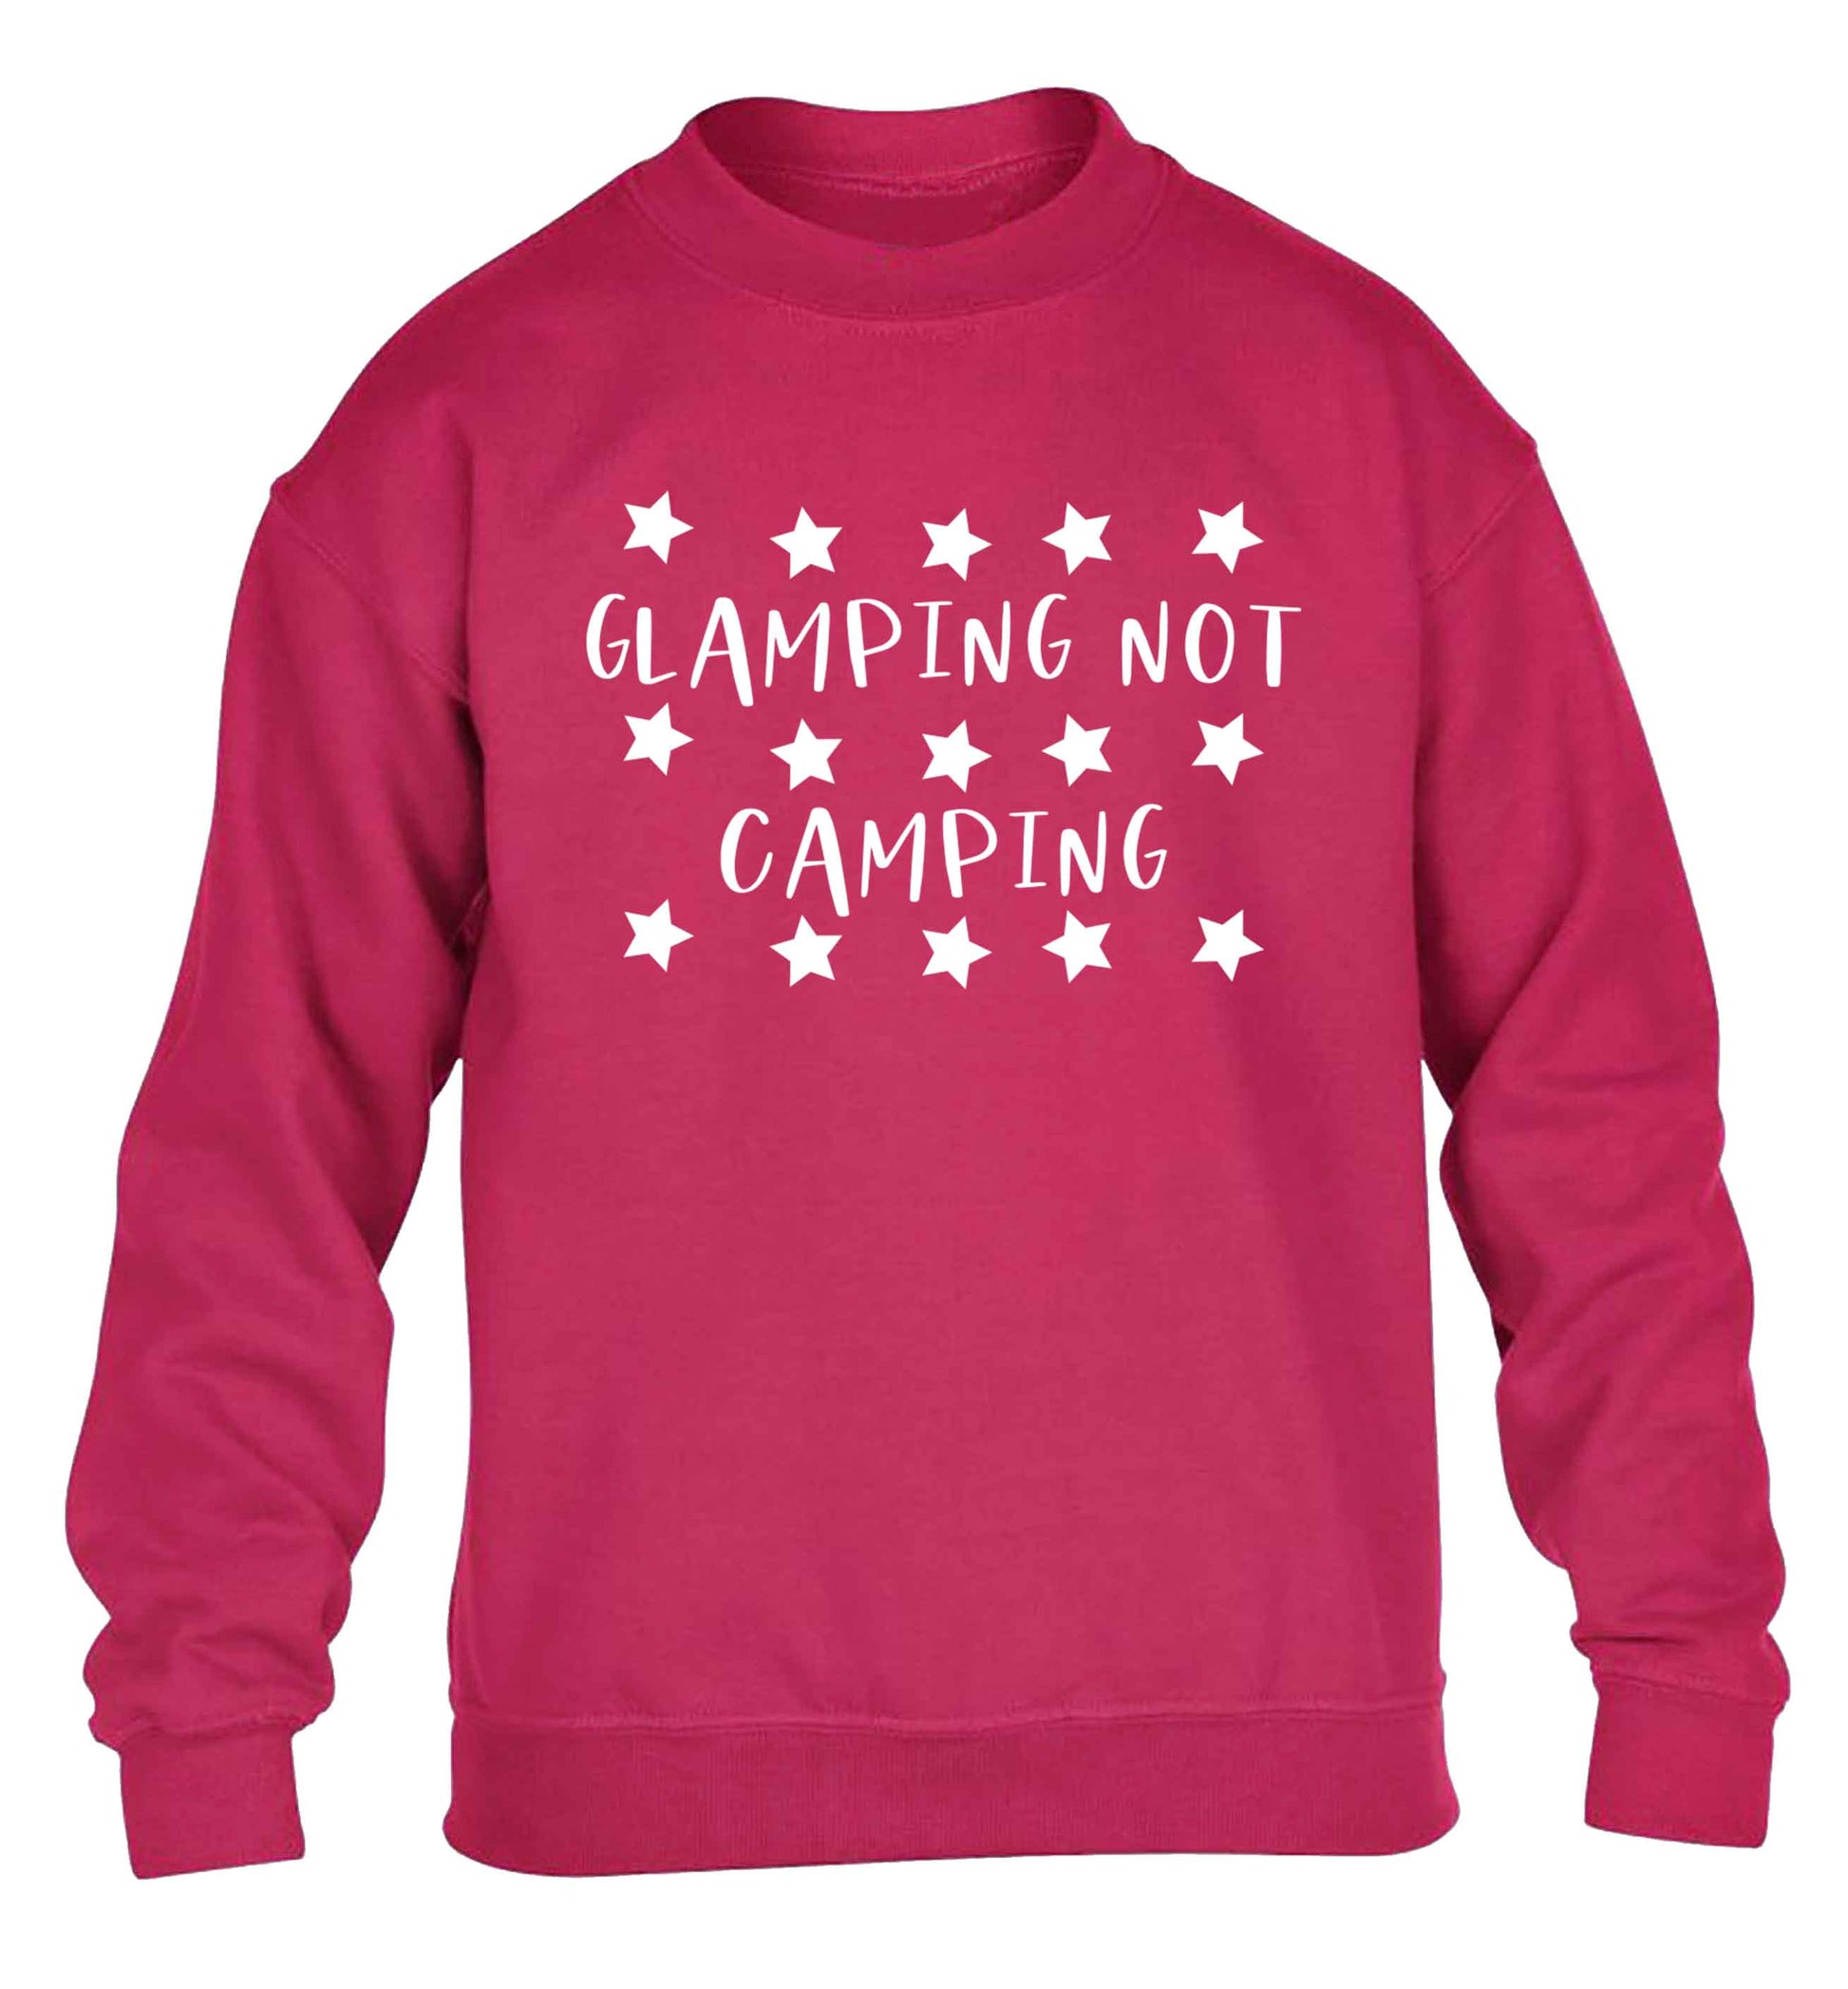 Glamping not camping children's pink sweater 12-13 Years